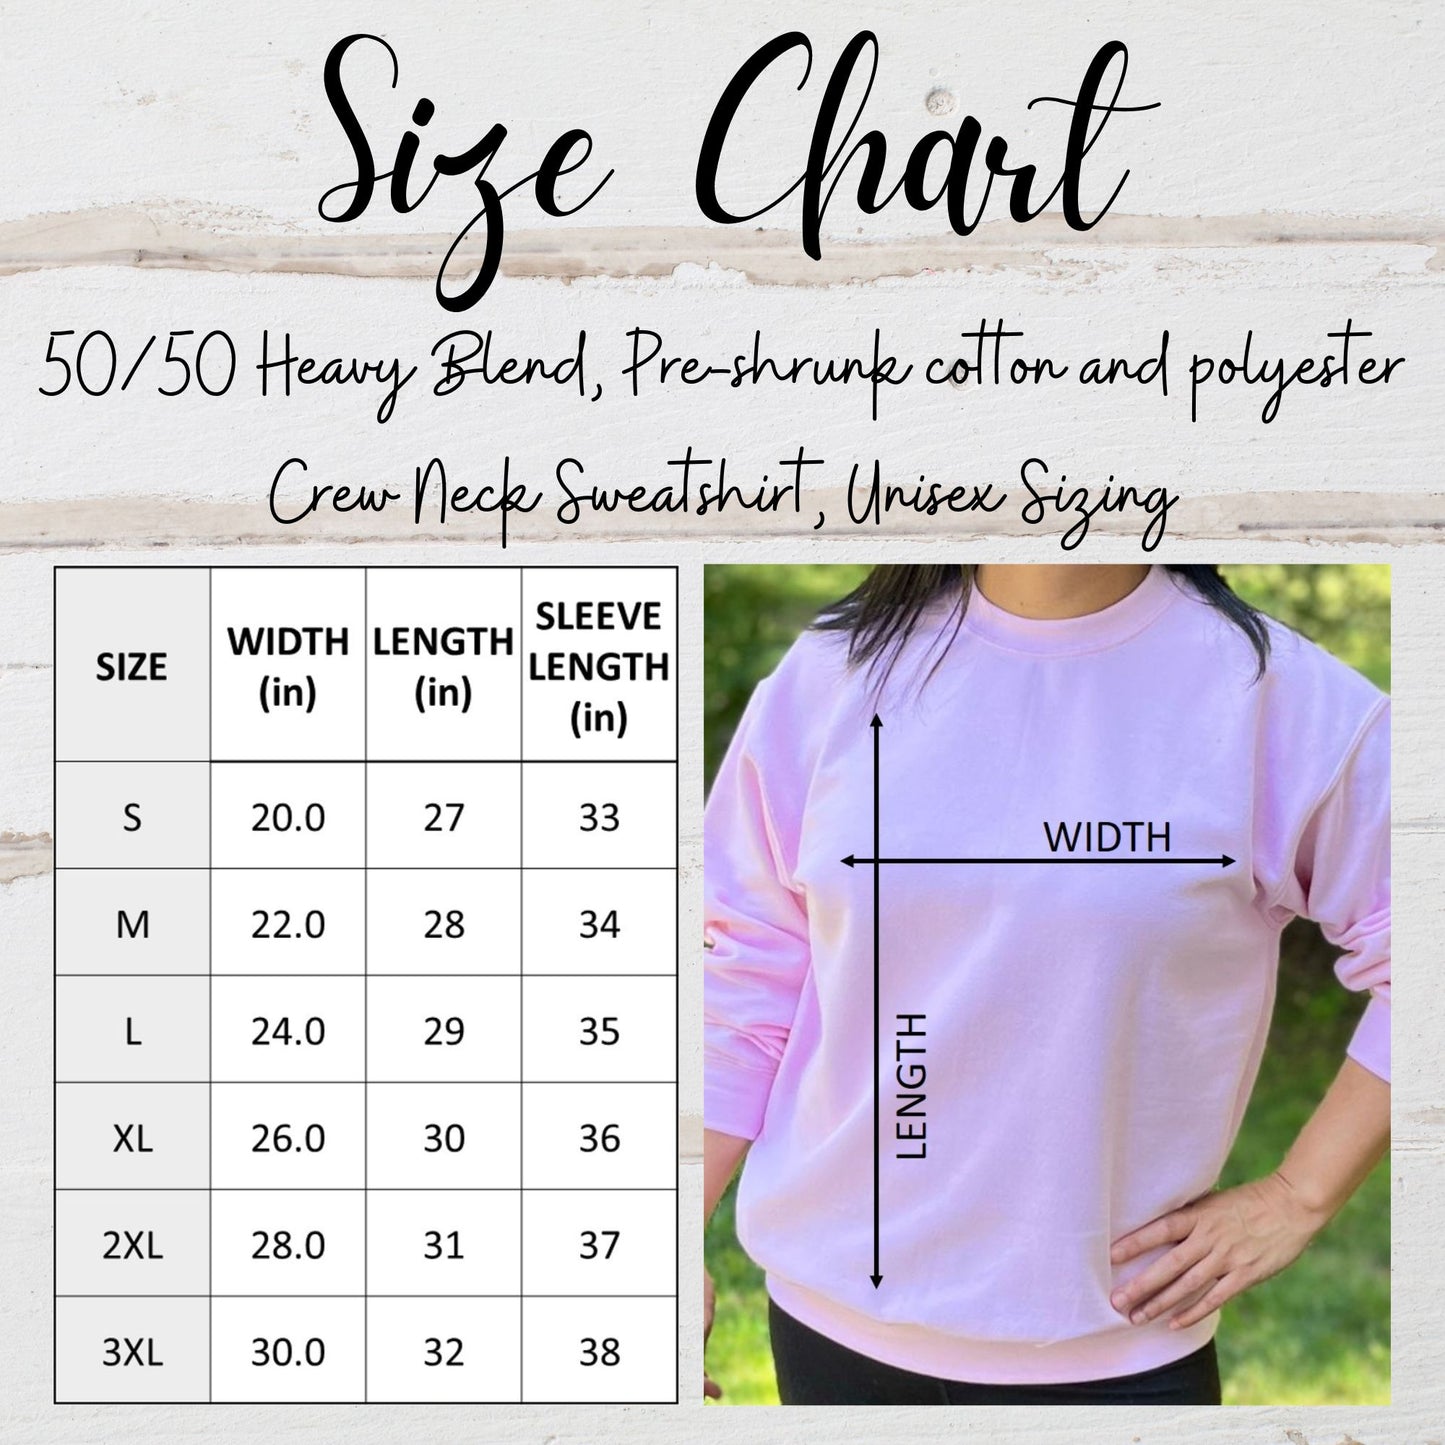 the size chart for a women's crop top